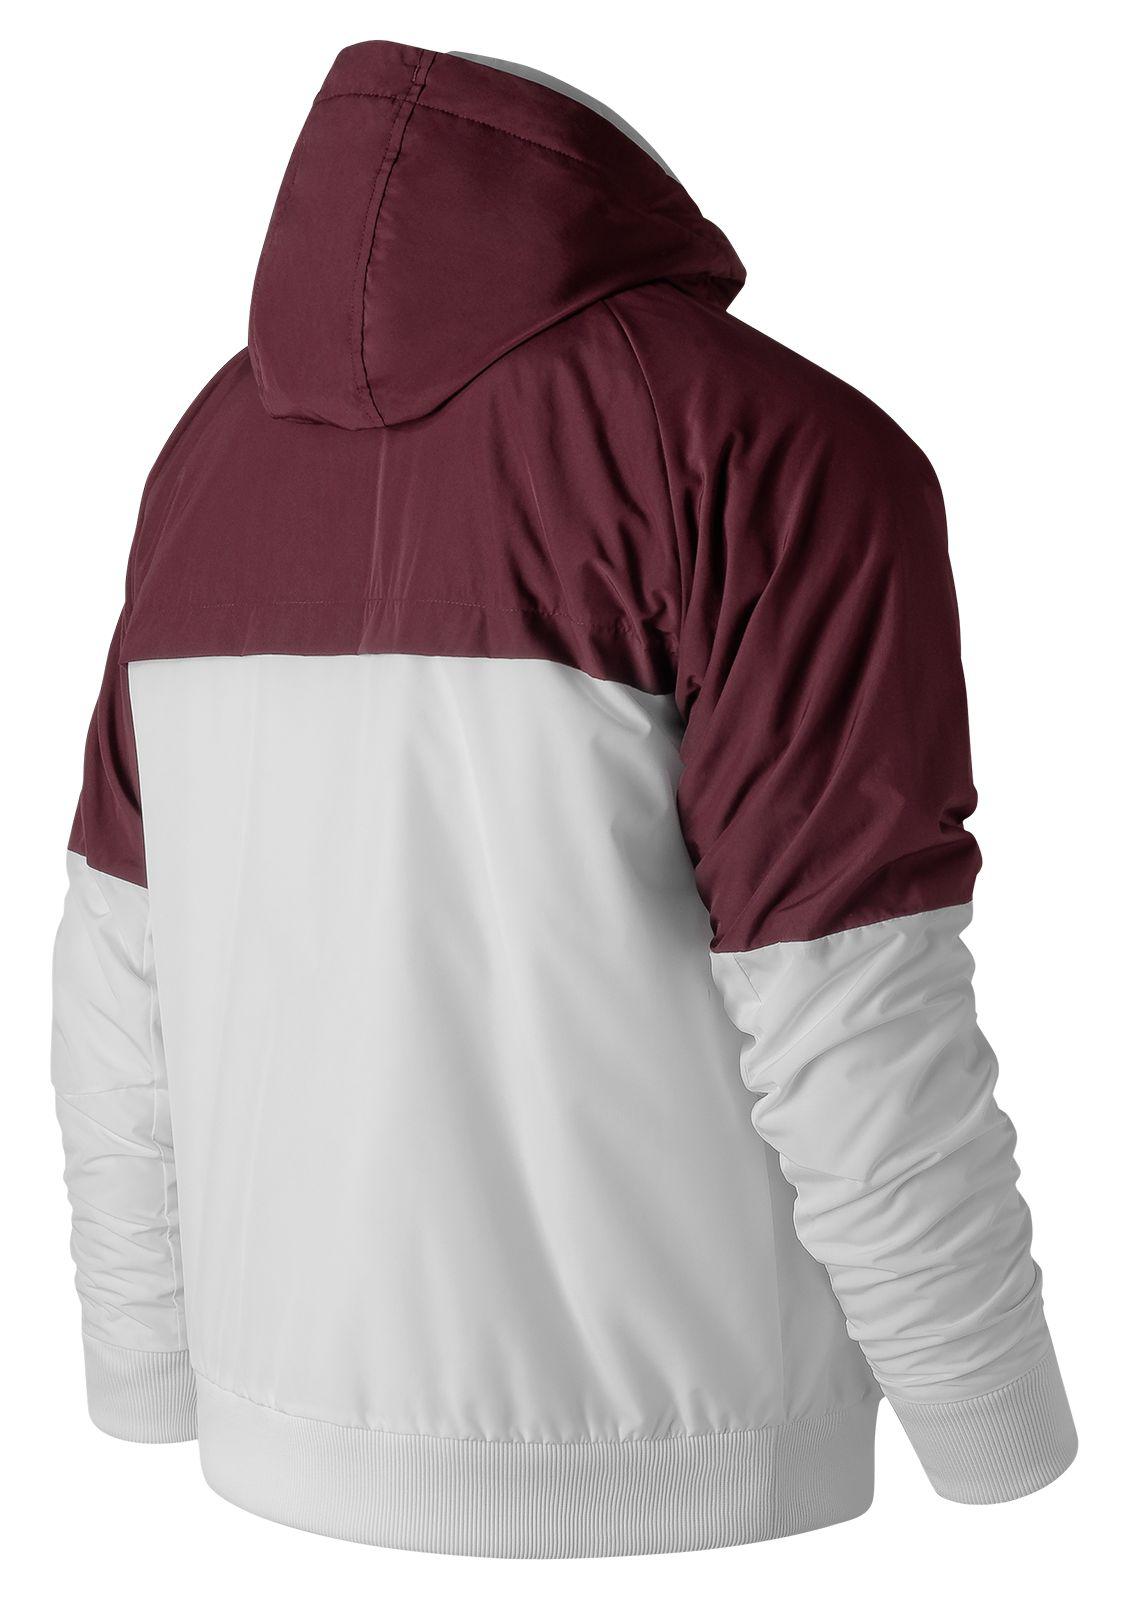 New Balance Synthetic Nb Athletics 78 Winter Jacket in White for Men - Lyst